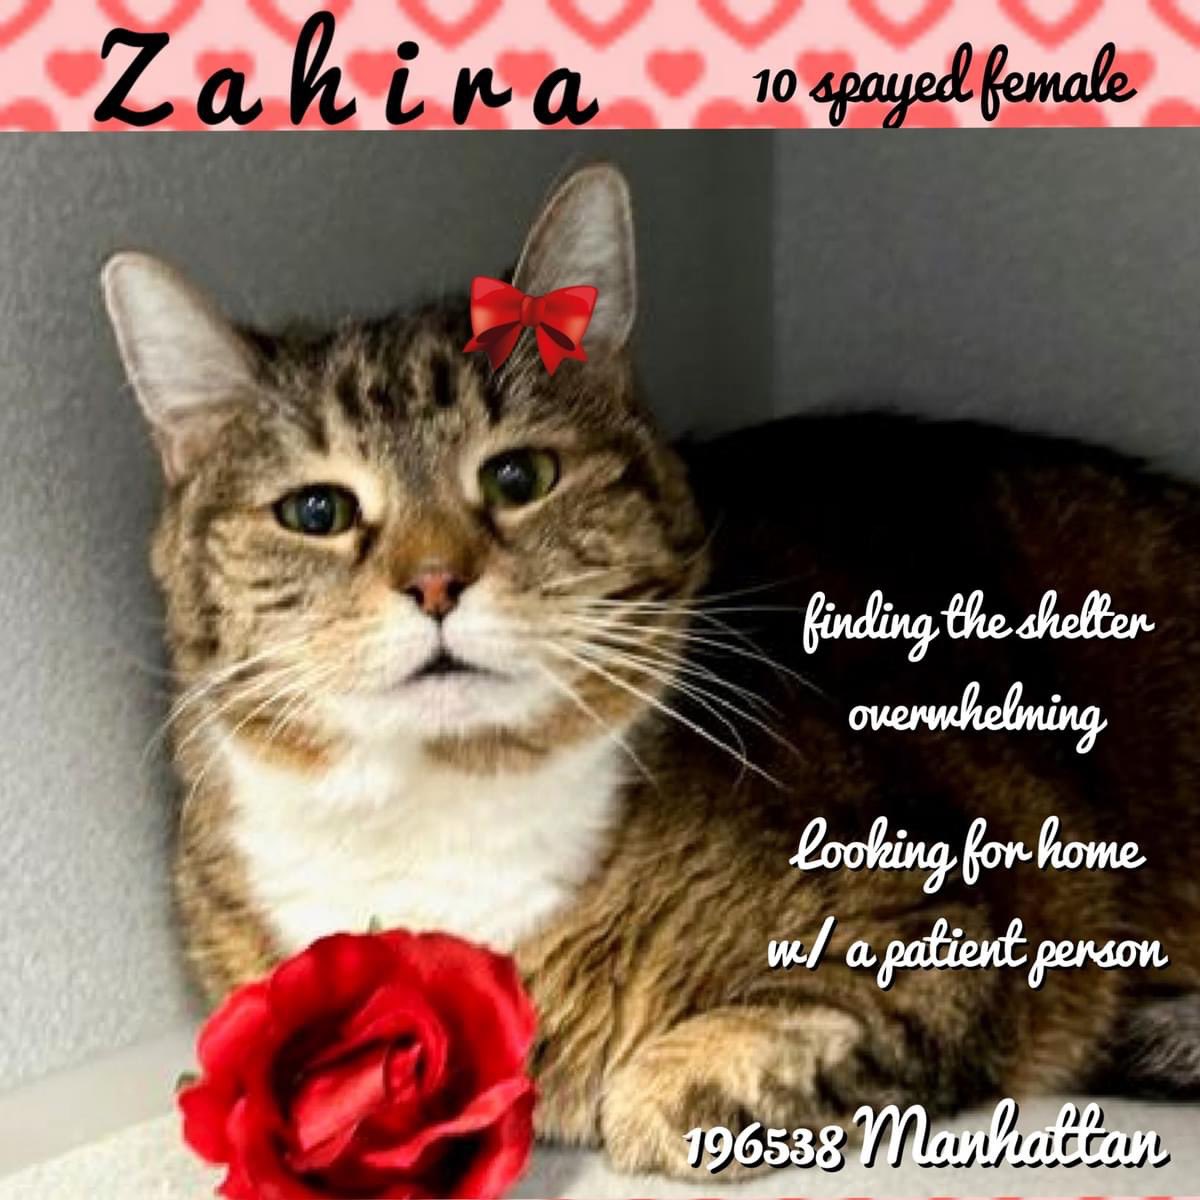 🆘Please RT-adopt-foster! 🆘 ZAHIRA is on the “emergency placement” list at #ACCNYC and needs out of the shelter by 12 NOON 4/13! #URGENT #NYC #CATS #NYCACC #TeamKittySOS #AdoptDontShop #CatsOfTwitter newhope.shelterbuddy.com/Animal/Profile…